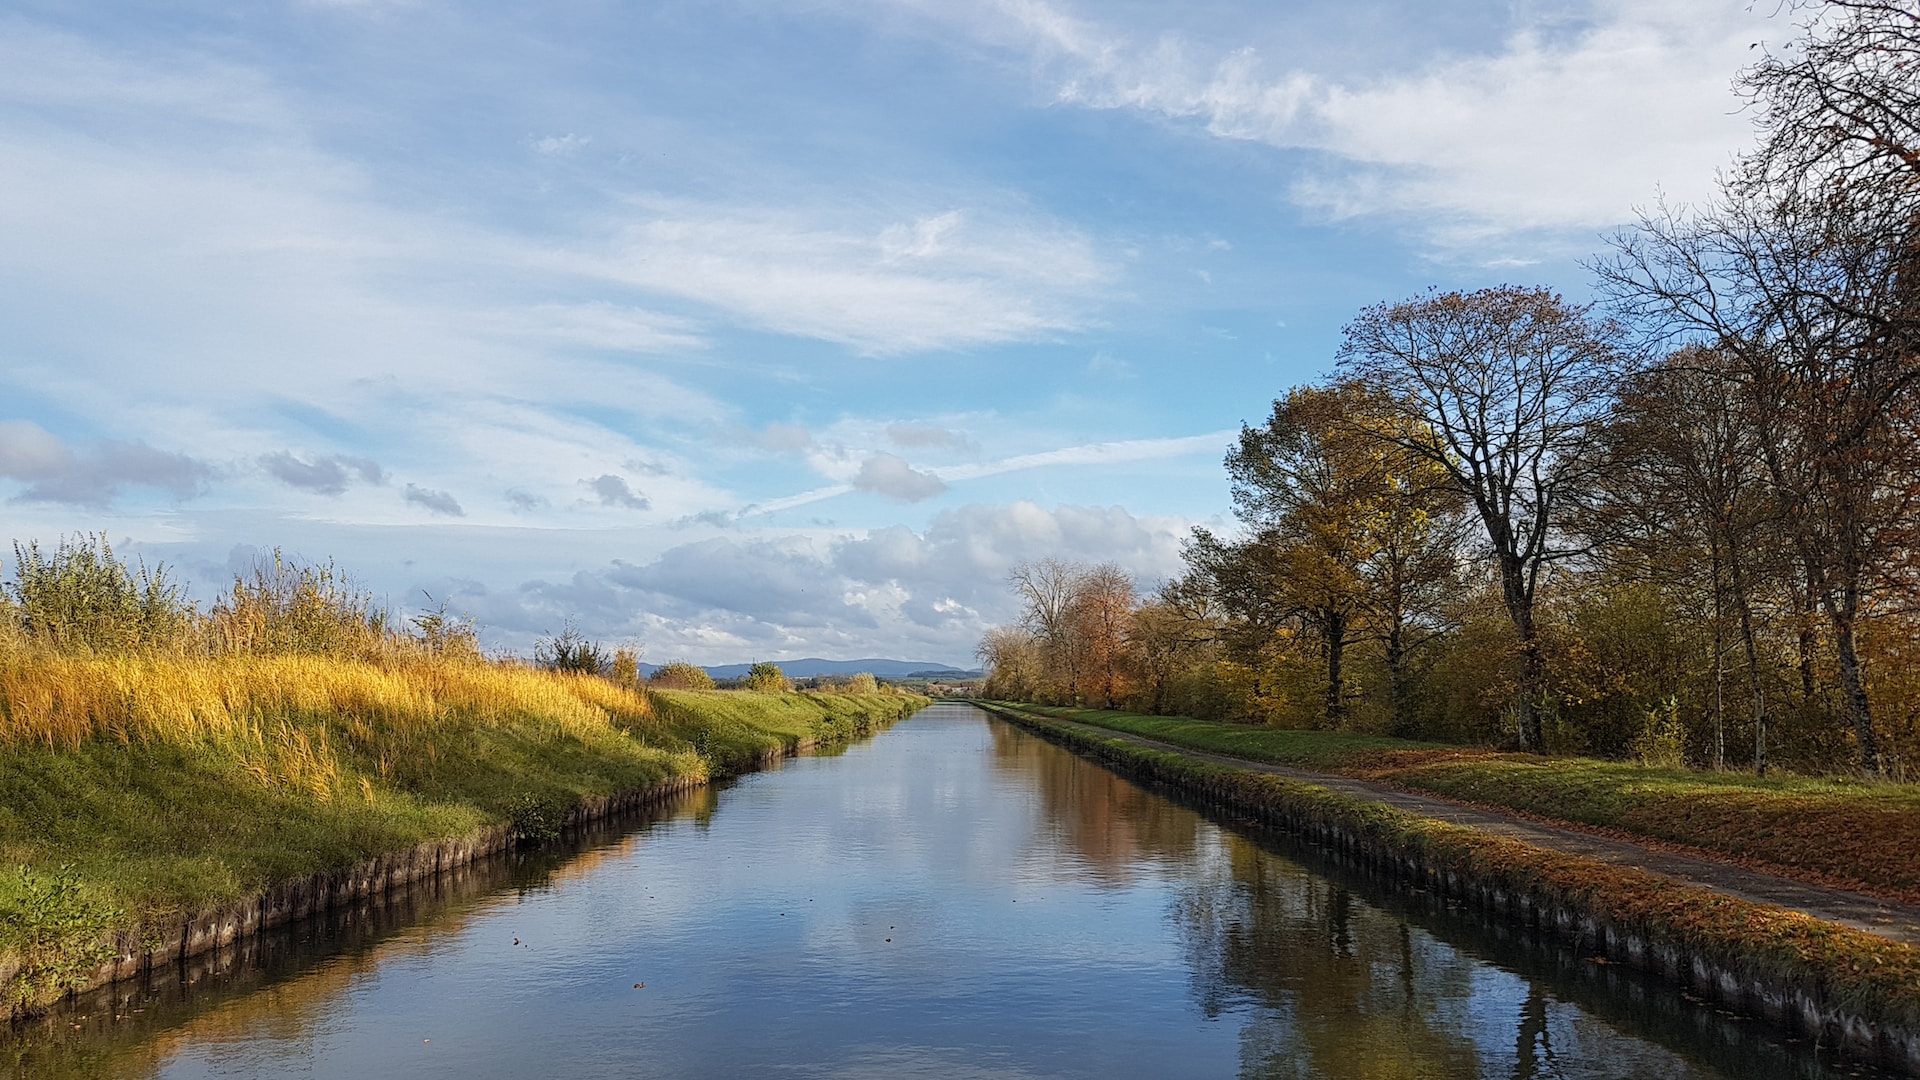 Auditor general calls for urgent financial overhaul at Scottish Canals